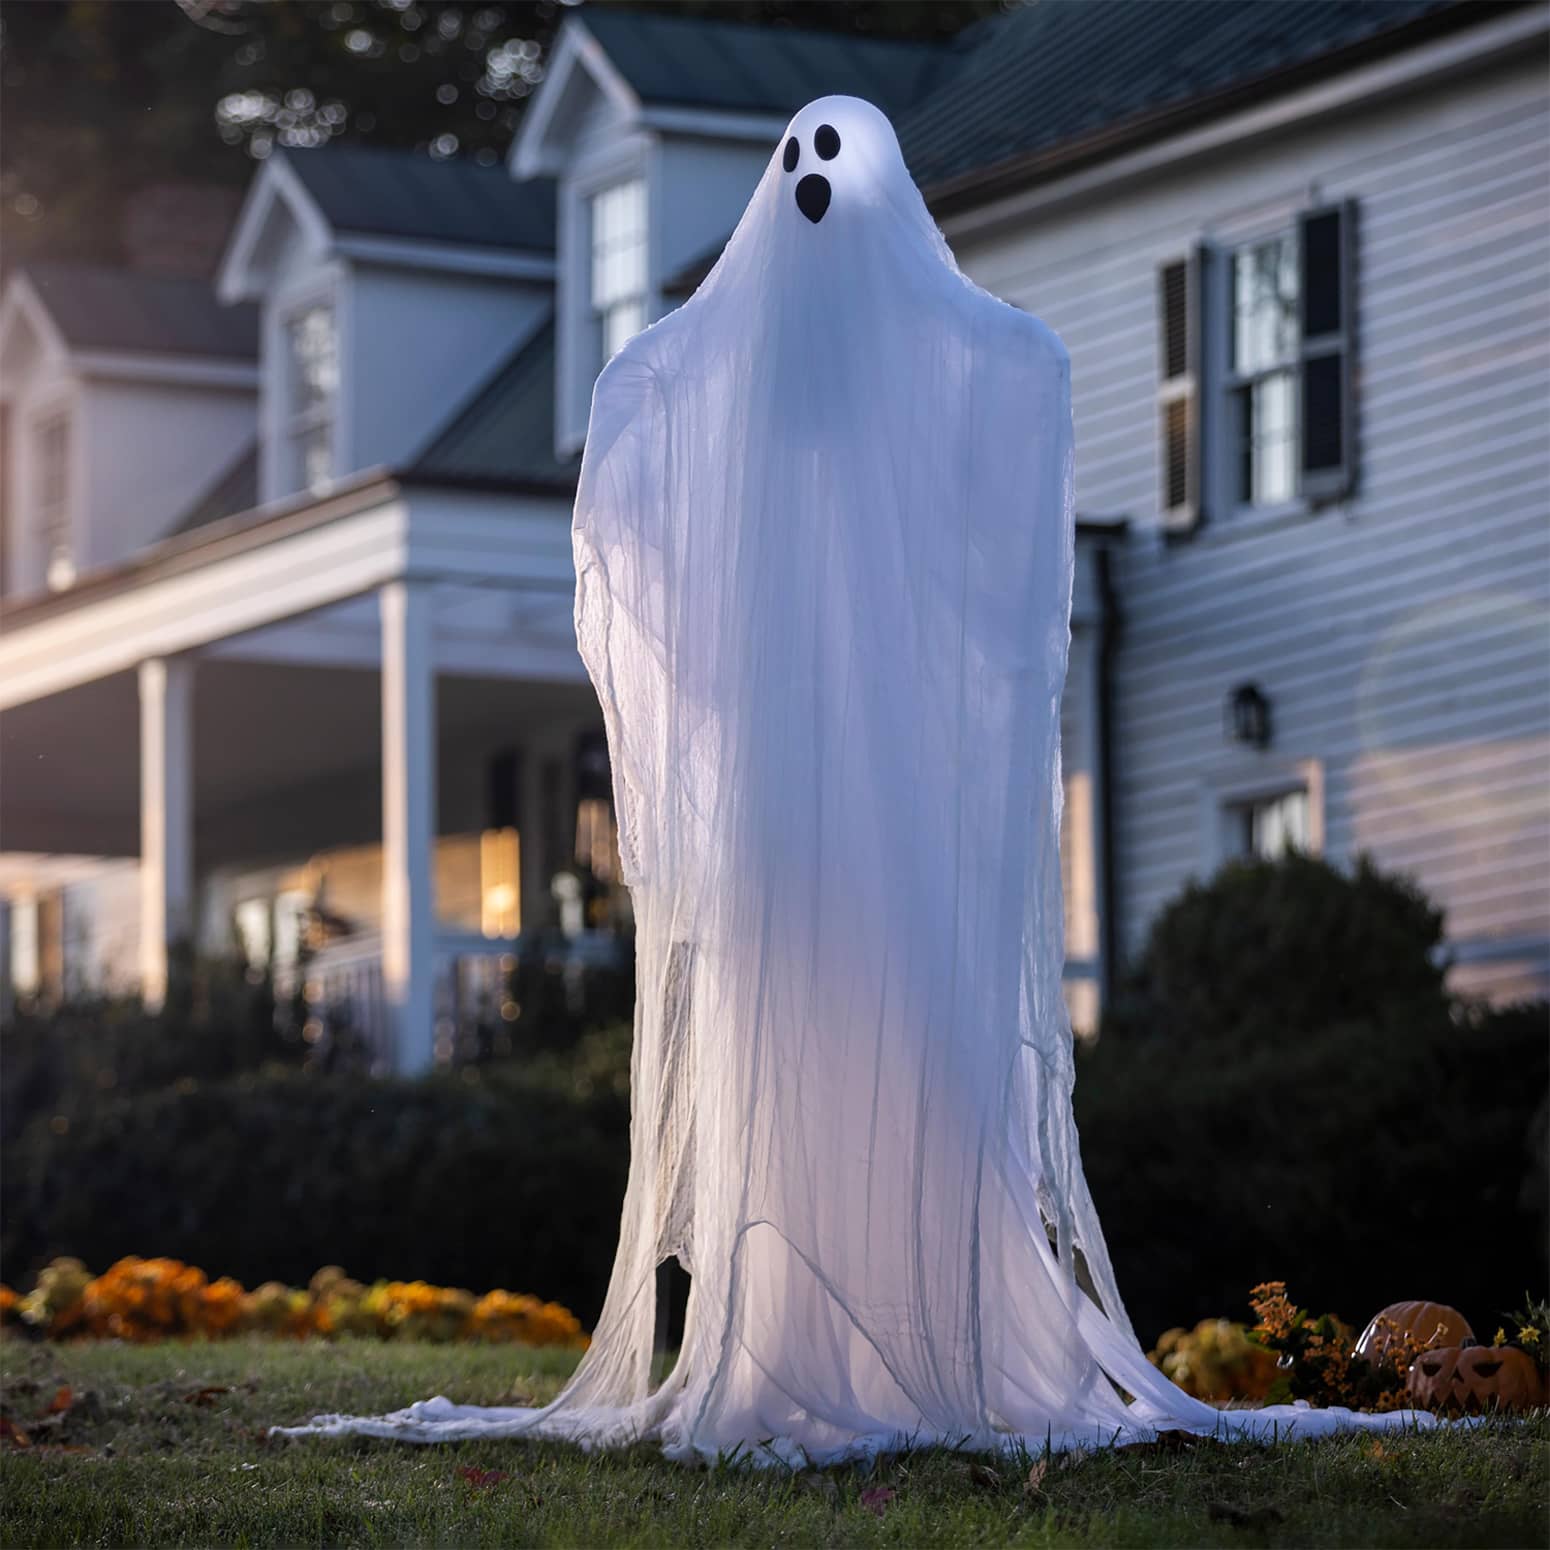 Giant 8 Foot Tall Illuminated Ghost Stakes